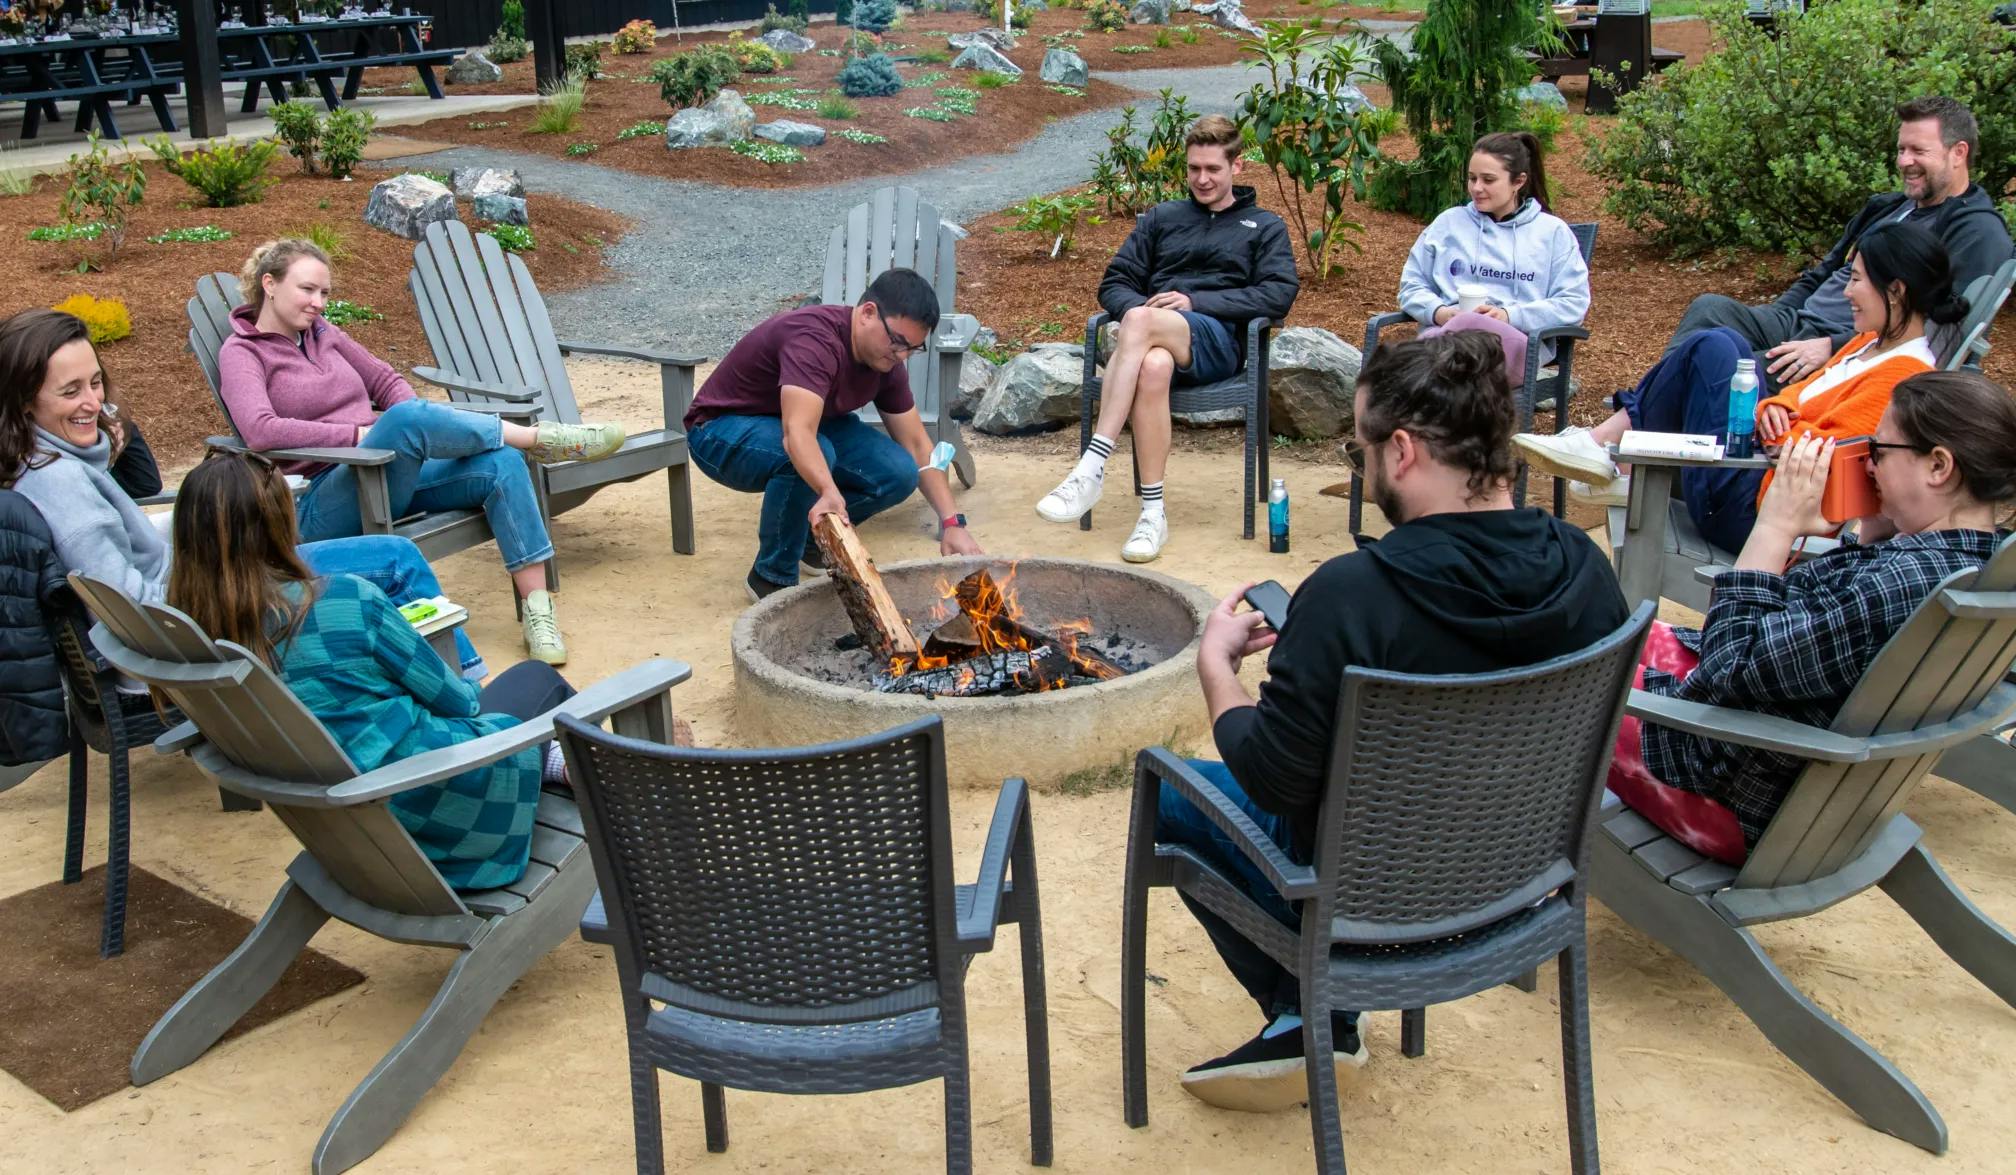 Gathering for a campfire at the offsite